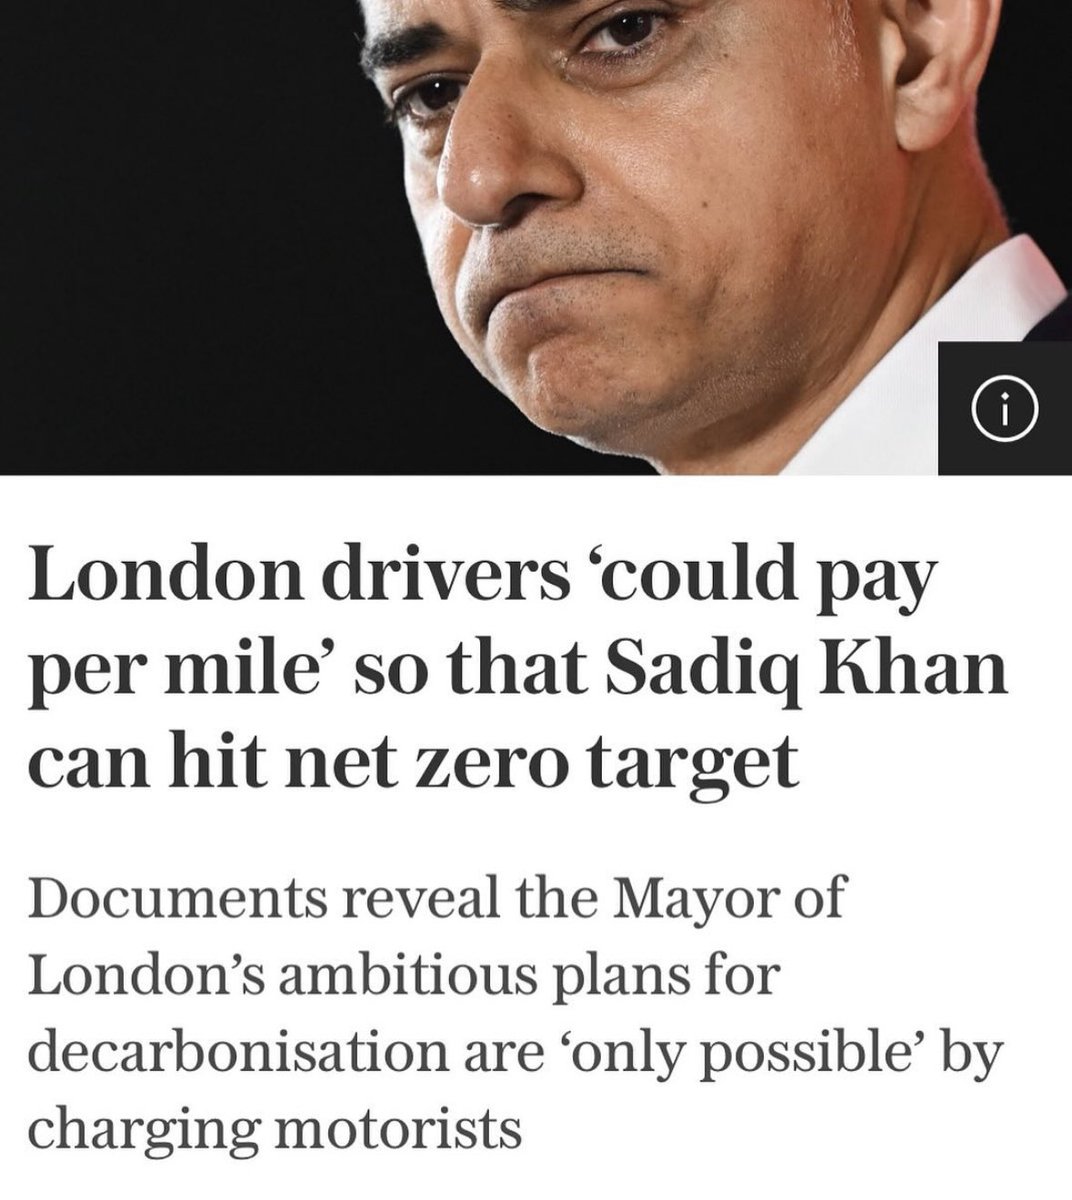 Myself & many others warned you that he’d do this,we were called conspiracy theorists & other slurs. If he gets in again, that’s EXACTLY what he’ll do. Then it will come to a town near you. The Mayor is not to be trusted & label us as far right. @SadiqKhan l @MayorofLondon